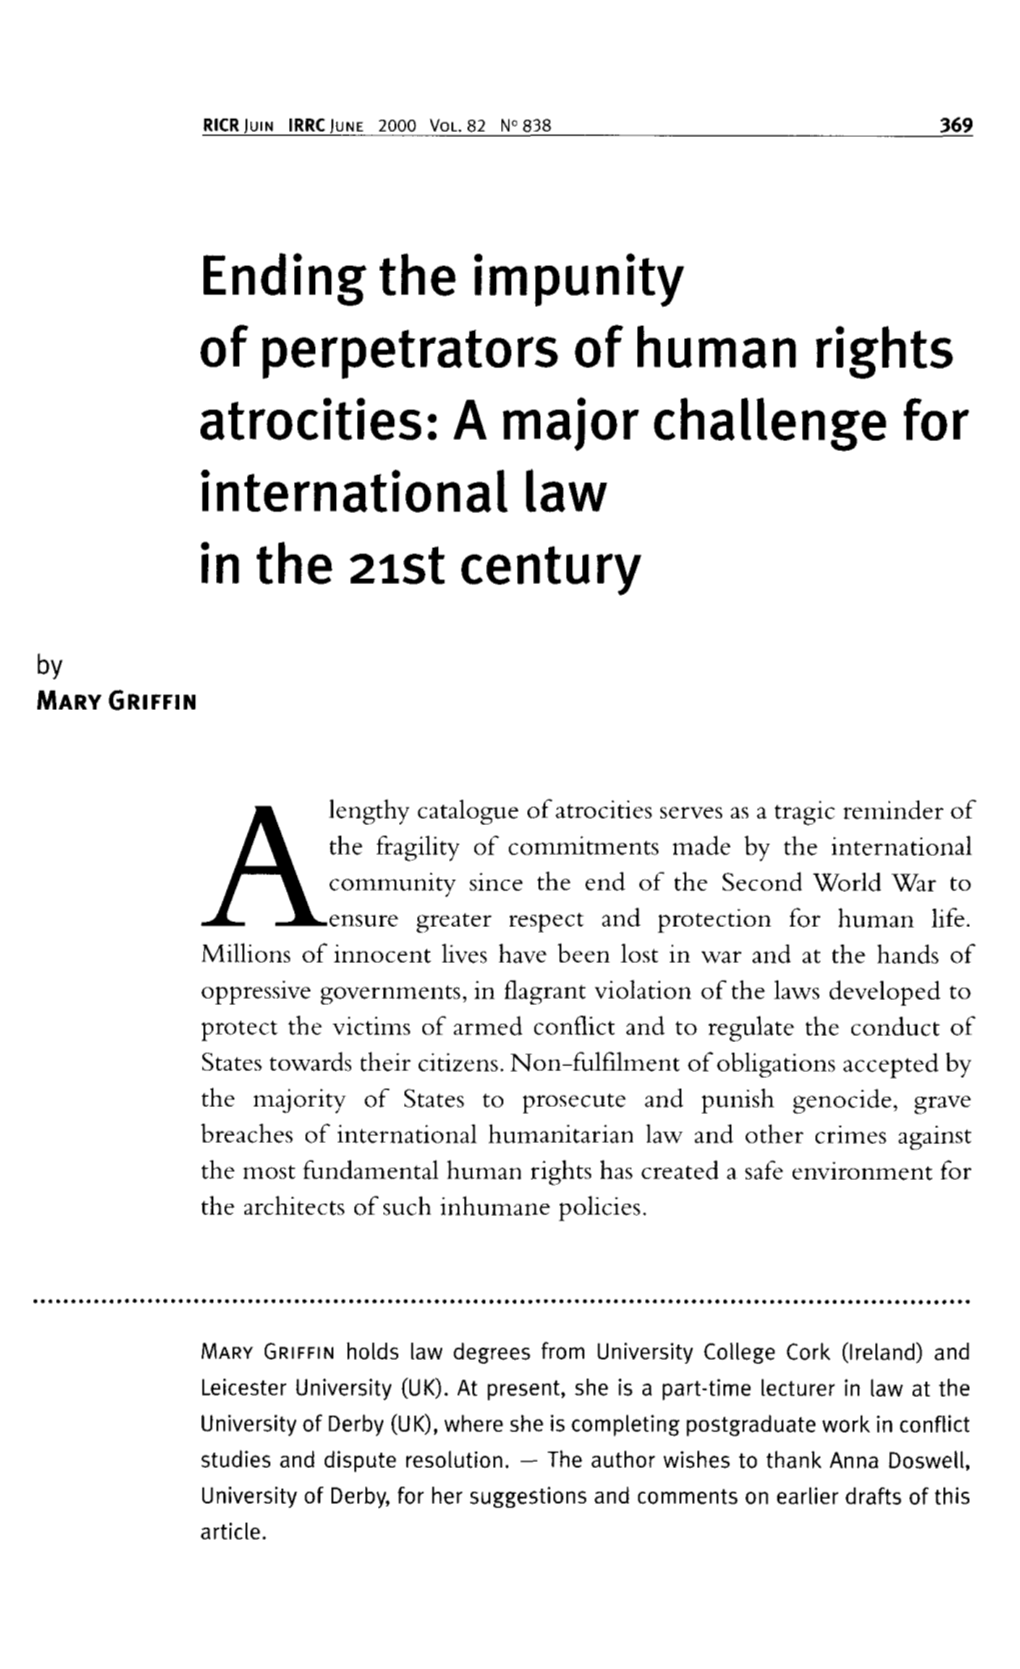 Ending the Impunity of Perpetrators of Human Rights Atrocities: a Major Challenge for International Law in the 21St Century by MARY GRIFFIN